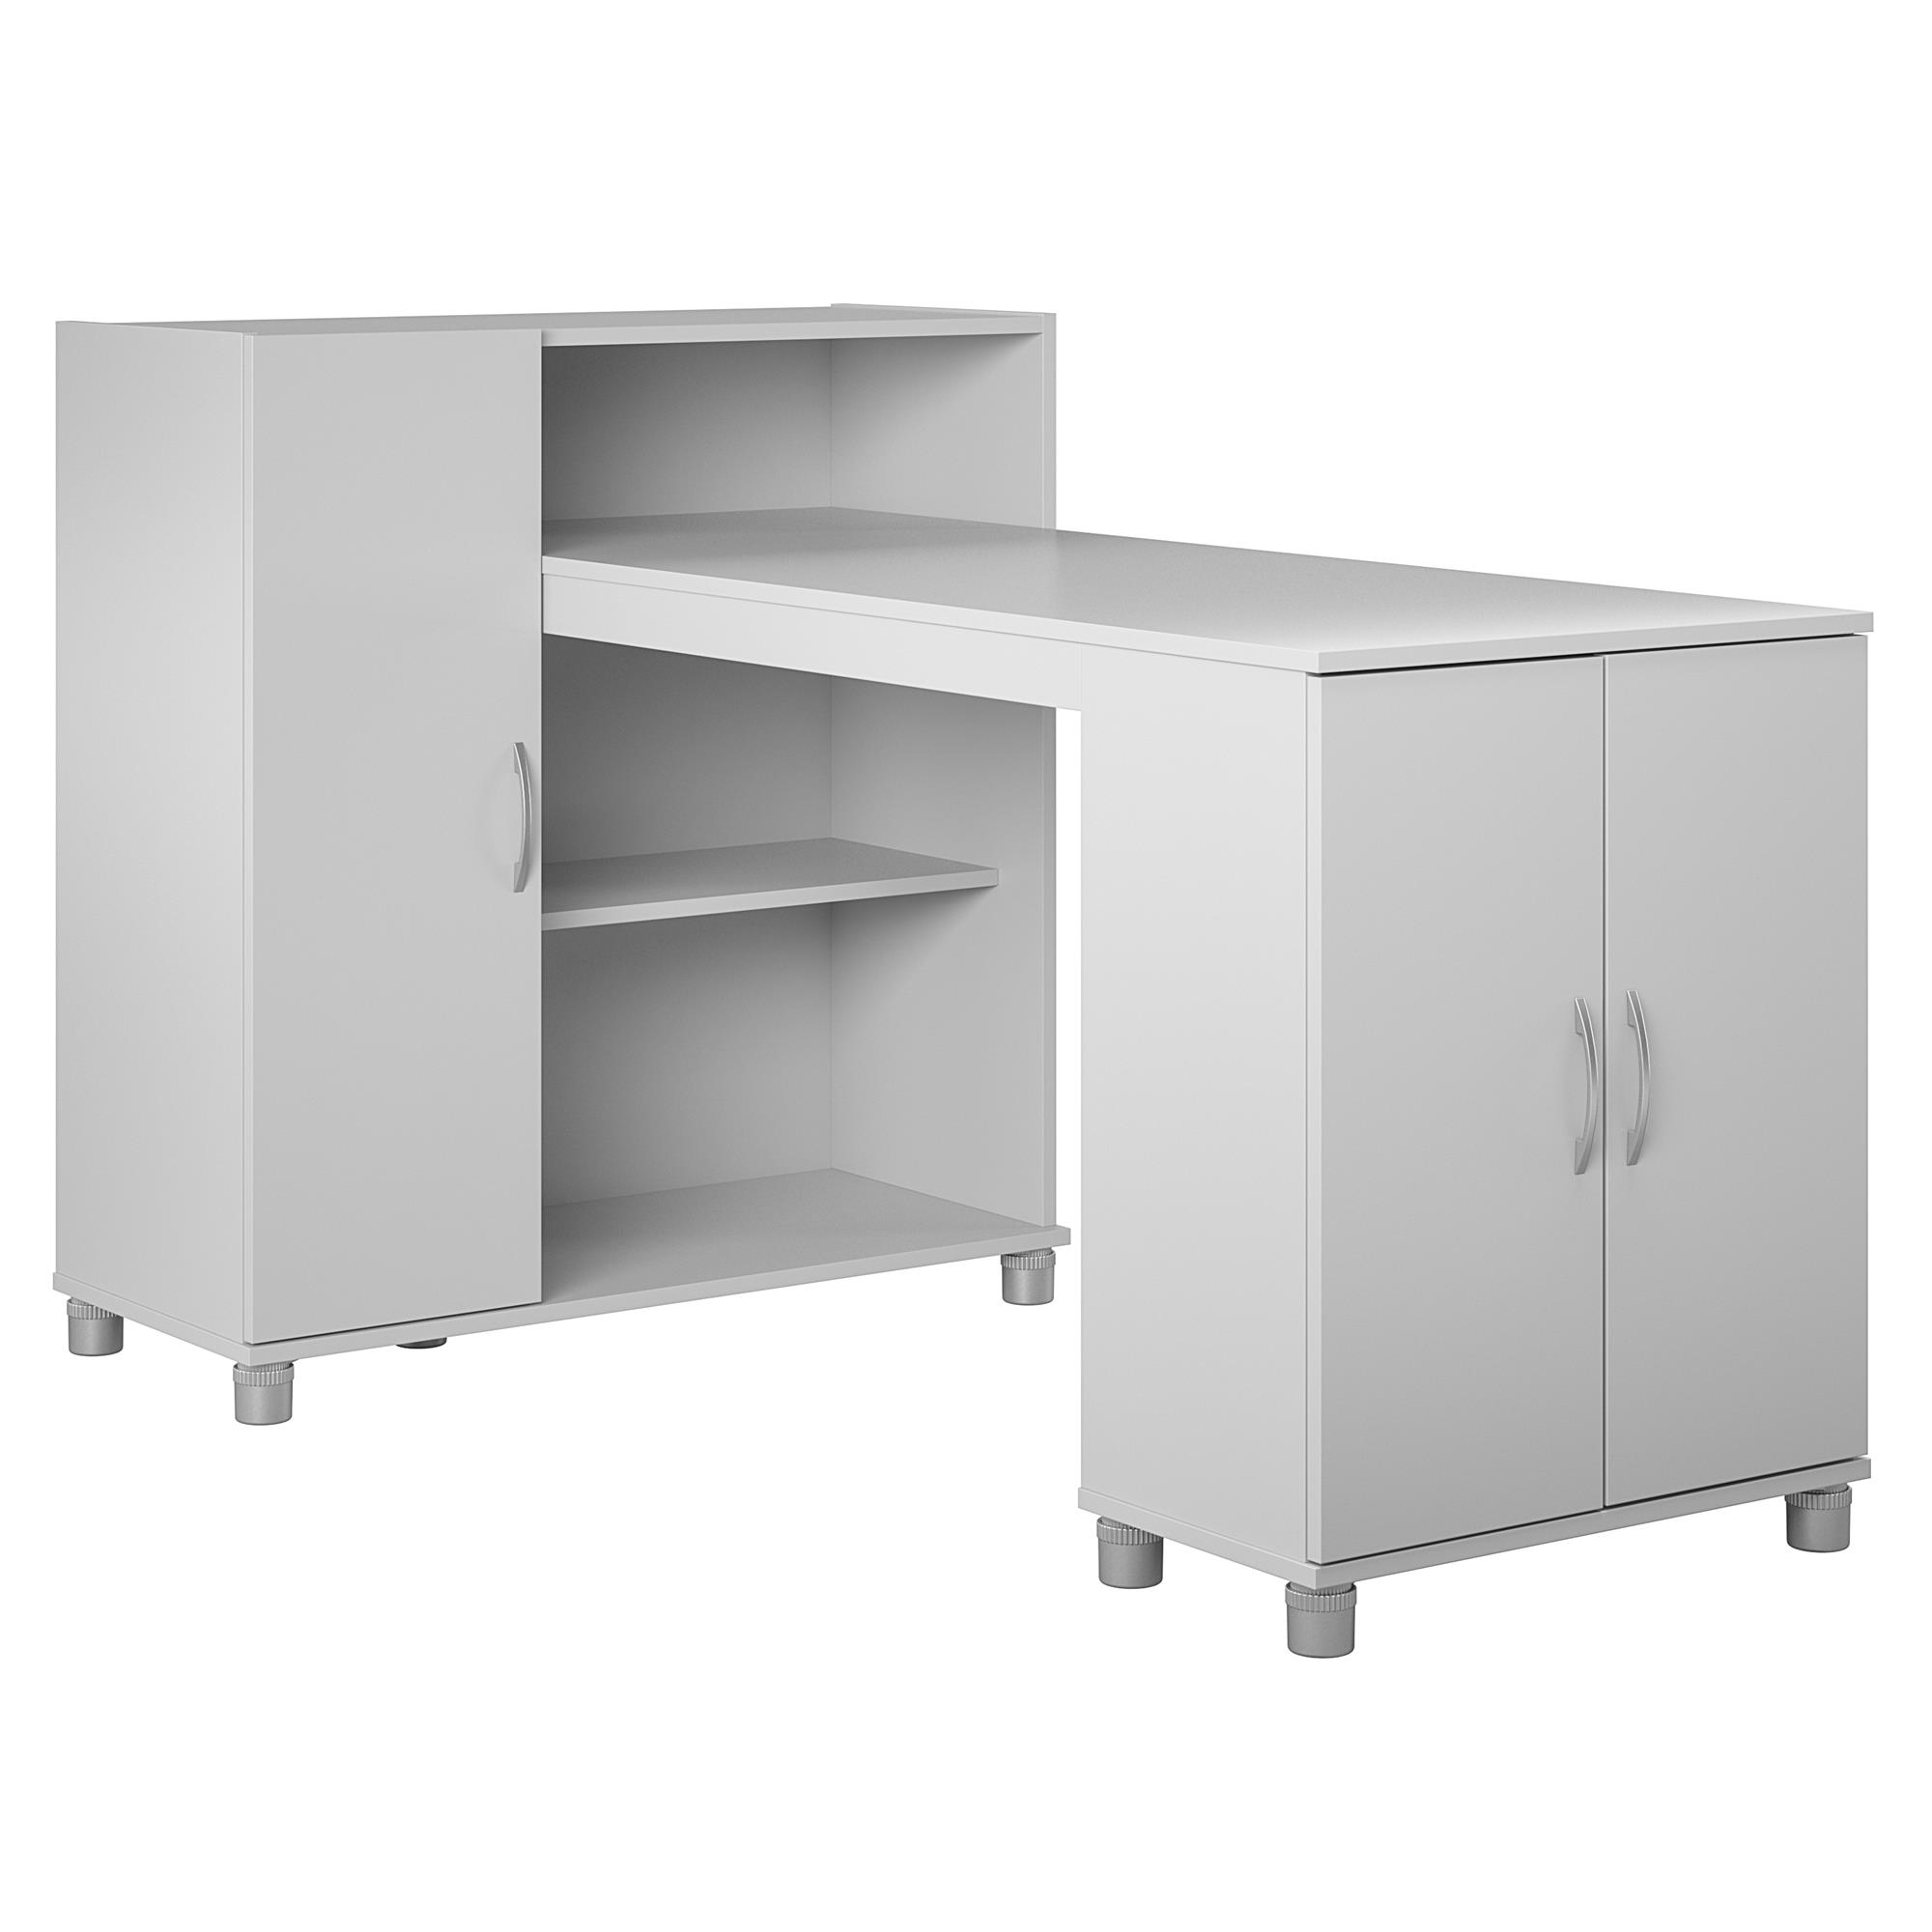 RealRooms Basin Hobby and Craft Desk with Storage, Dove Gray - image 1 of 9